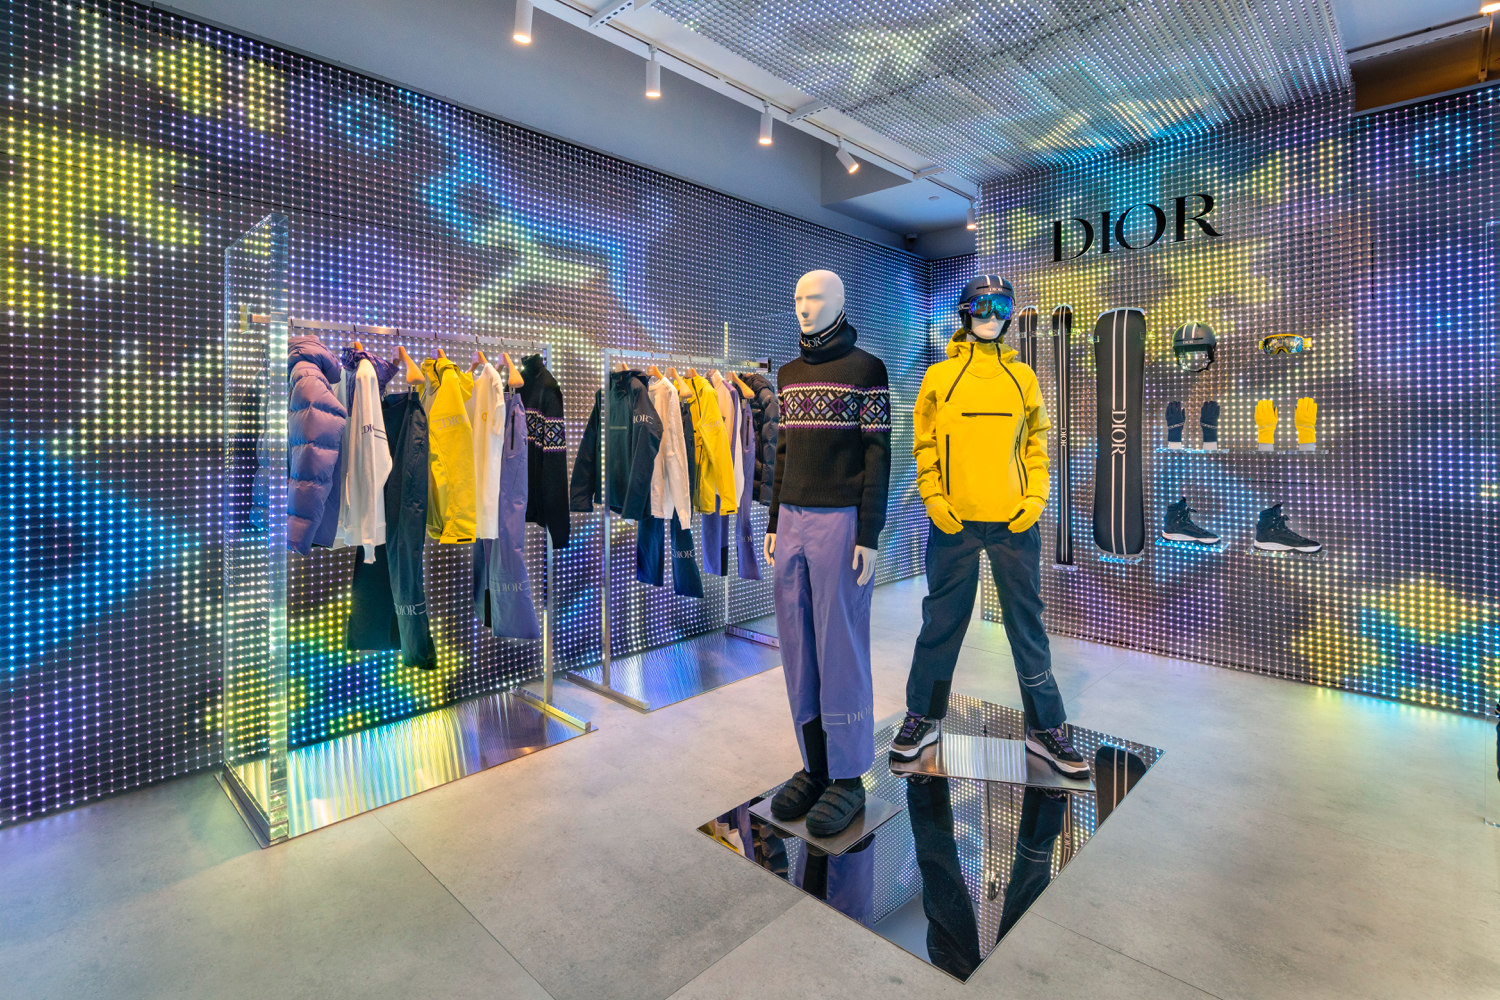 New York: Dior pop-up store